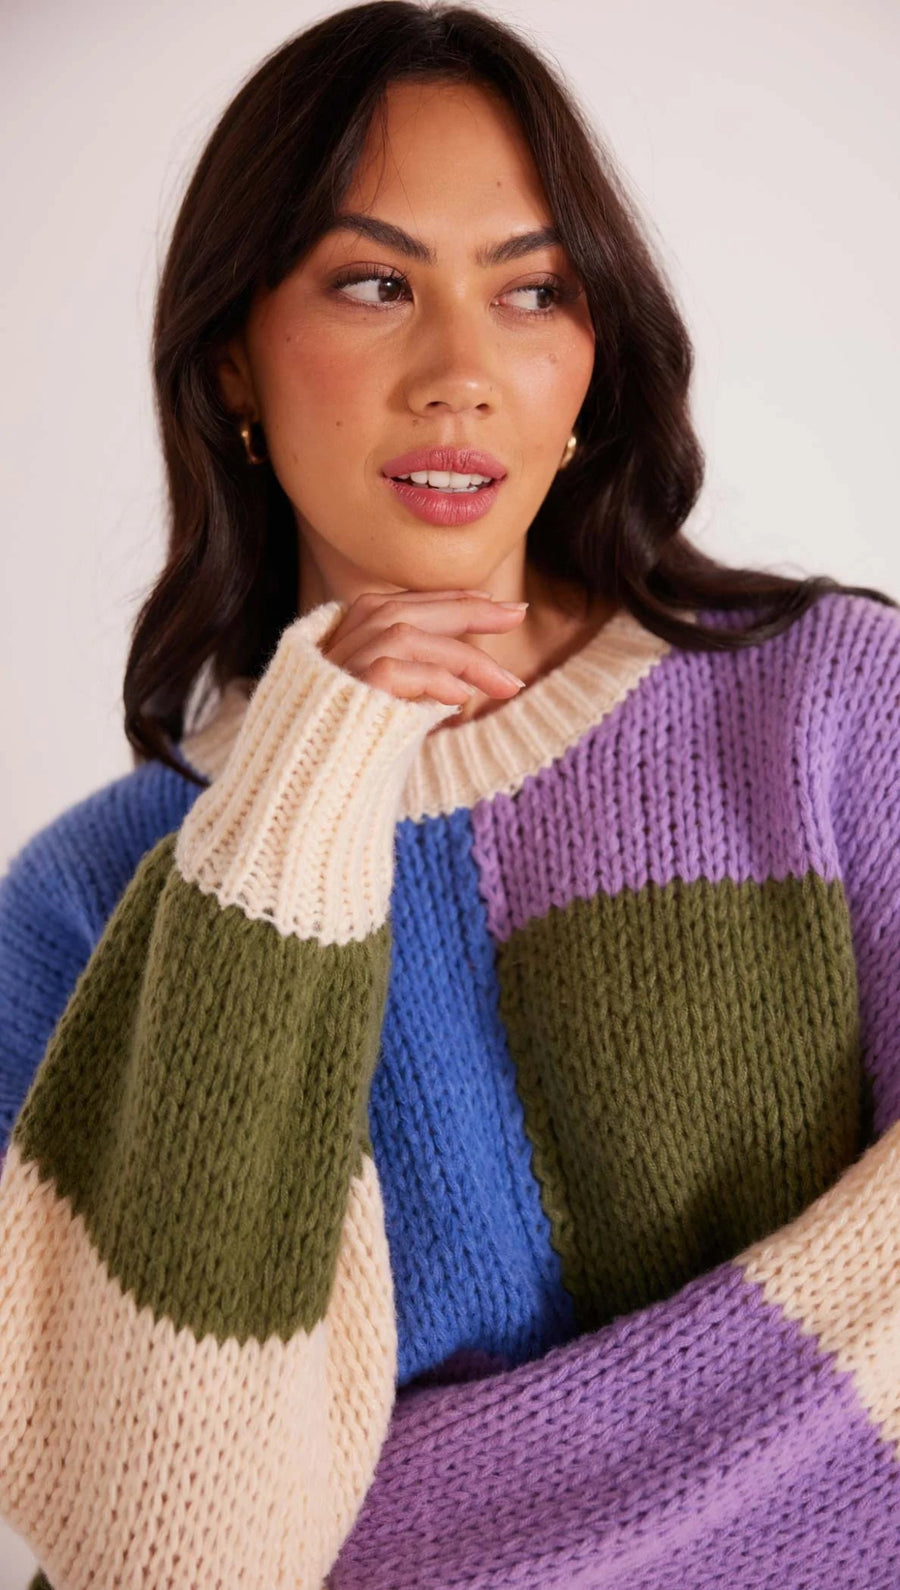 Lawrence Block Knit Sweater - Kohl and Soda